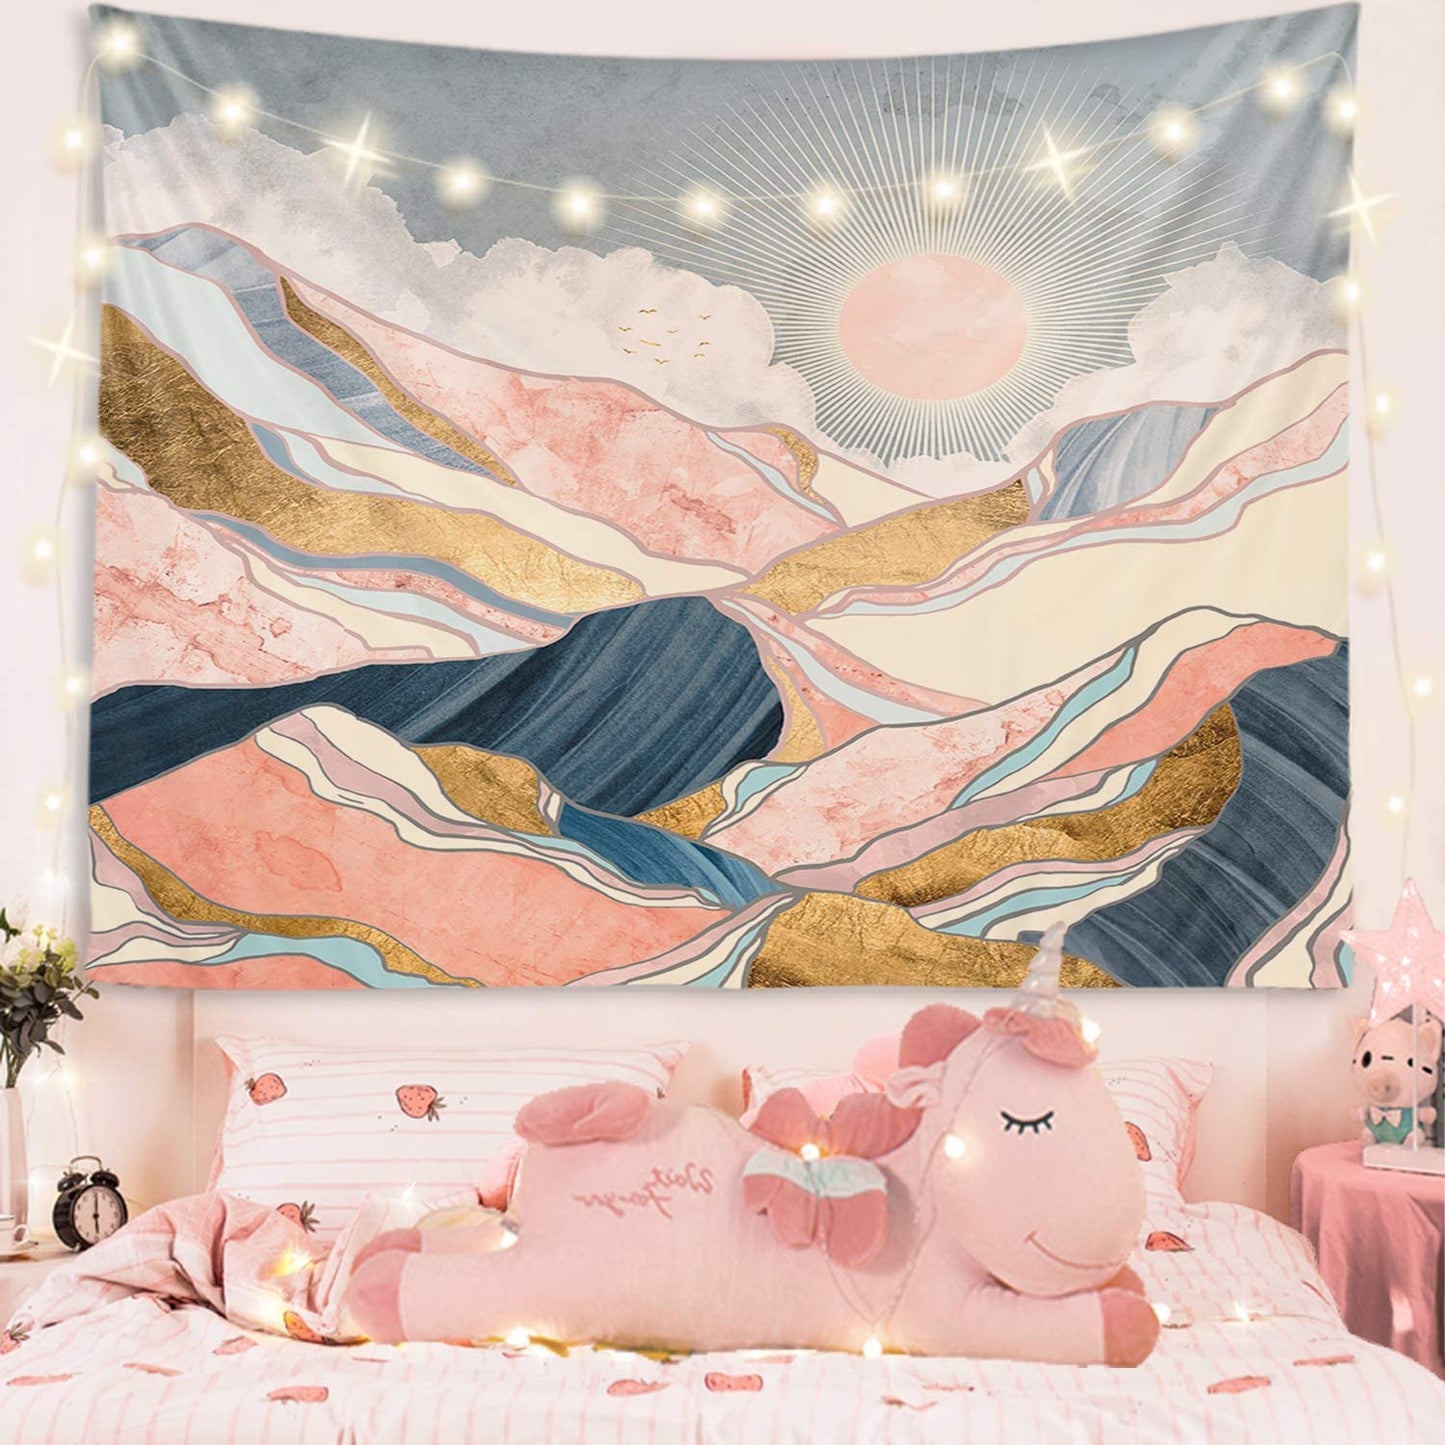 fangzhuo Mountain Tapestry Wall Hanging Pink Sunset Nature Landscape Tapestry Wall Decor for Livingroom Bedroom Dorm Home W59 x L51